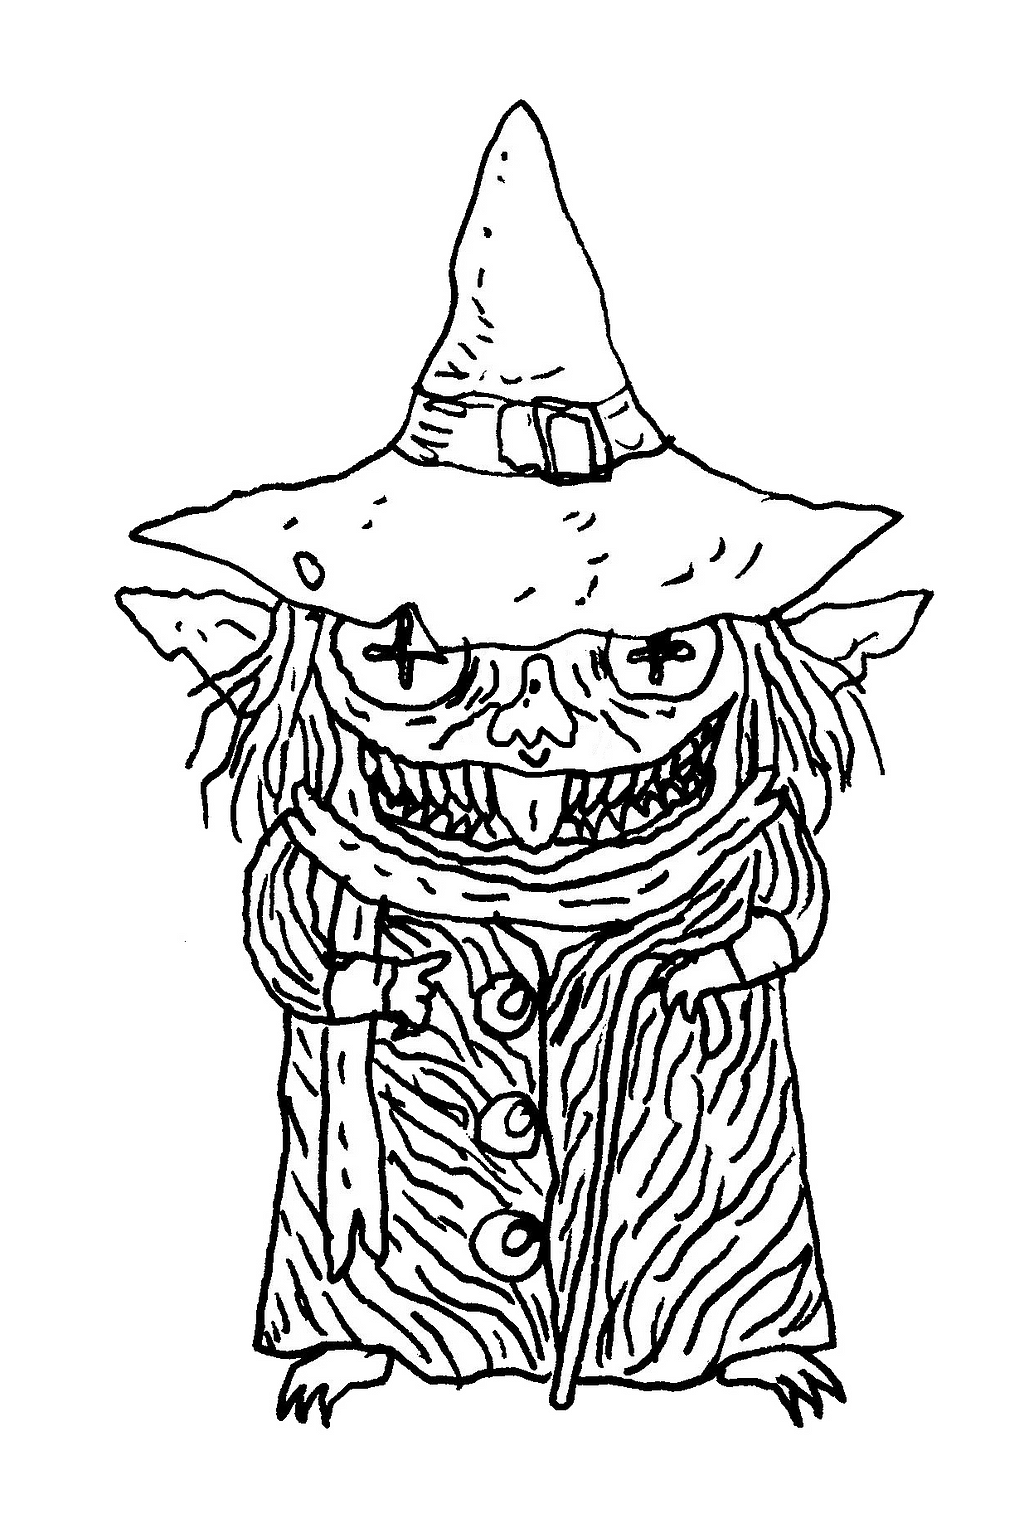 A little witch or sorcerer or something. Kinda looks like the Black Mage from Final Fantasy 1.